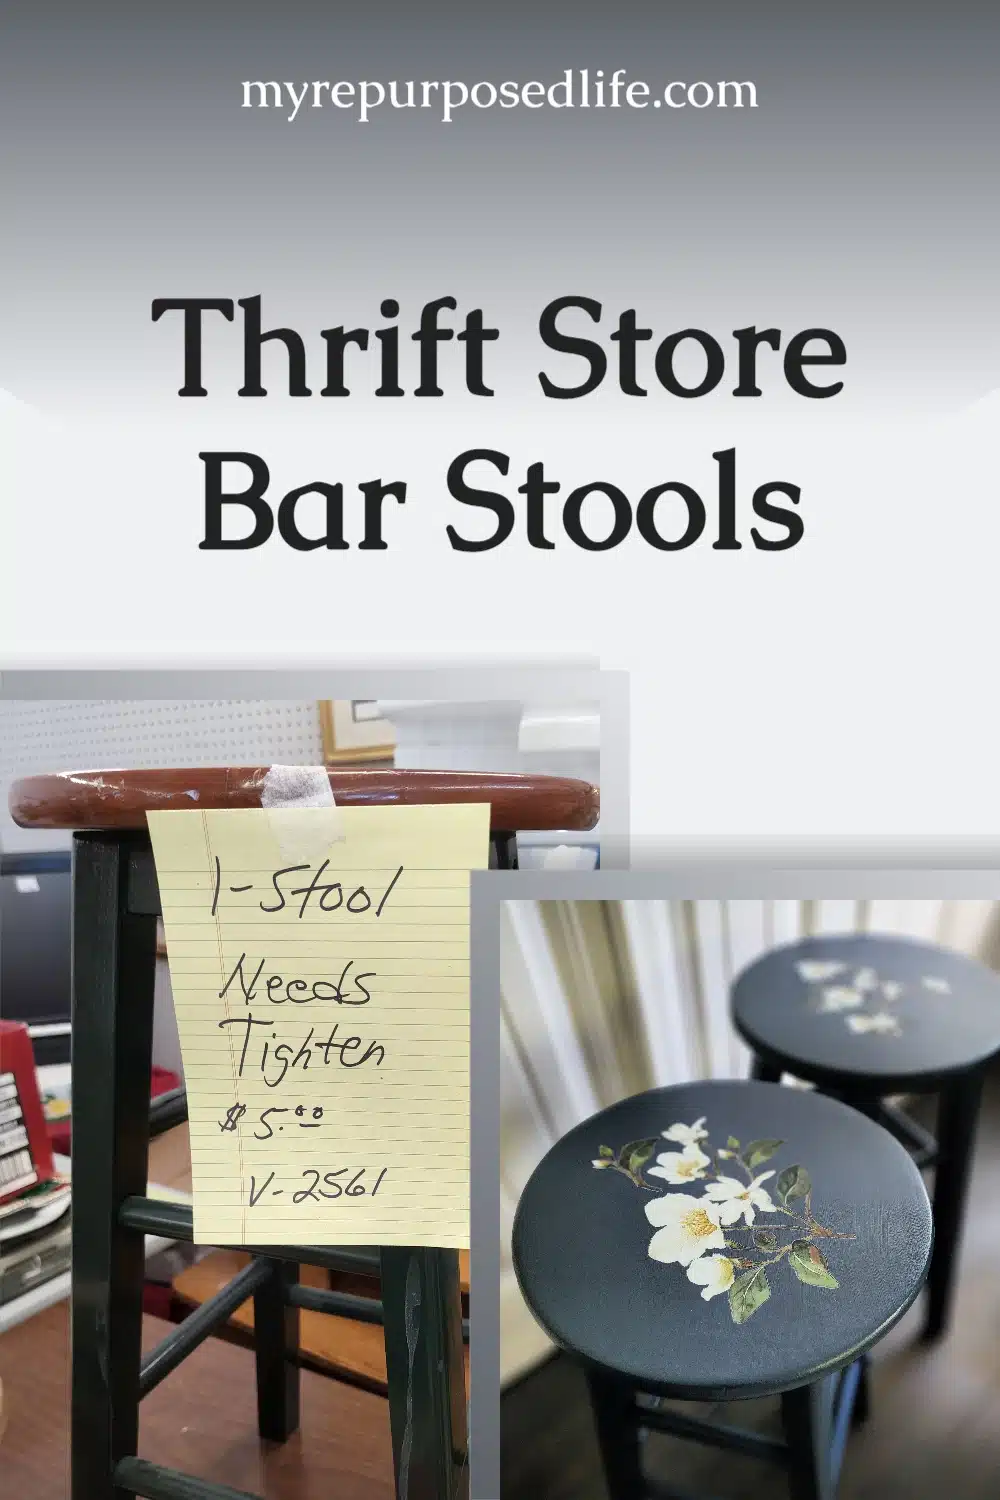 How to repair, paint and embellish a pair of broken down thrift store bar stools. These Navy blue bar stools get a great new look, after a decoupage failure. #MyRepurposedLife #upcycle #thriftstore #barstools #deocoupage #failure #rub-on #transfer via @repurposedlife